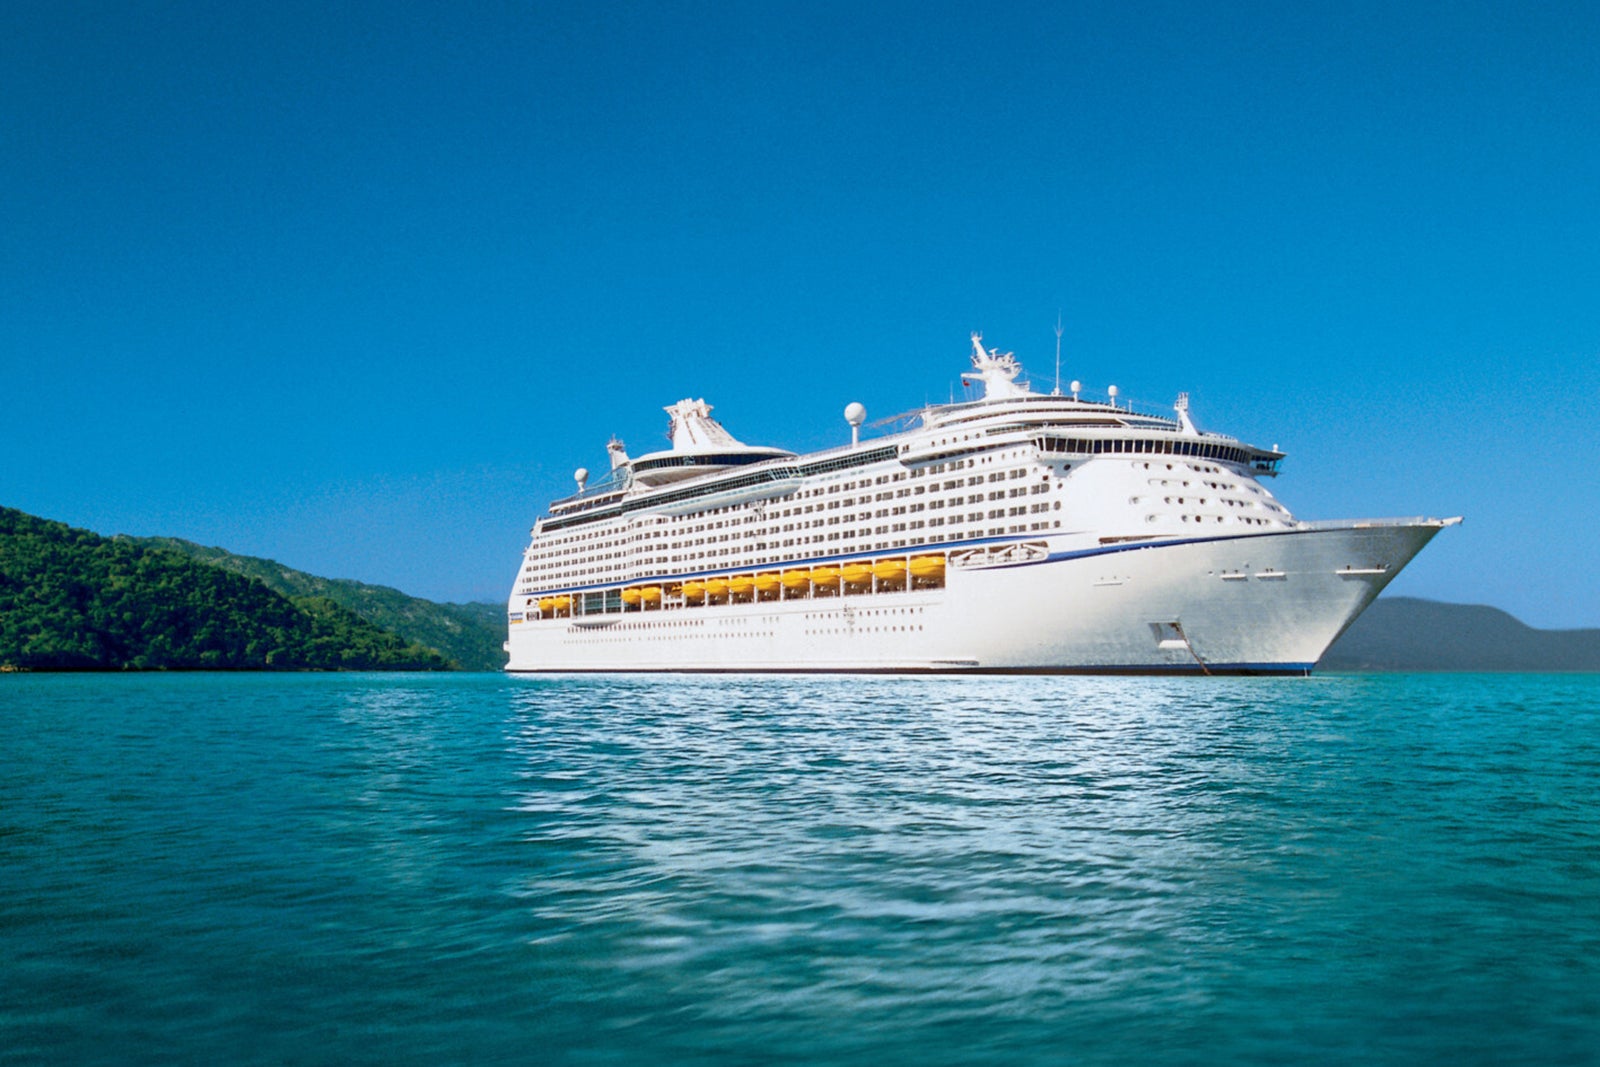 Two major cruise lines will resume travel in North America in June